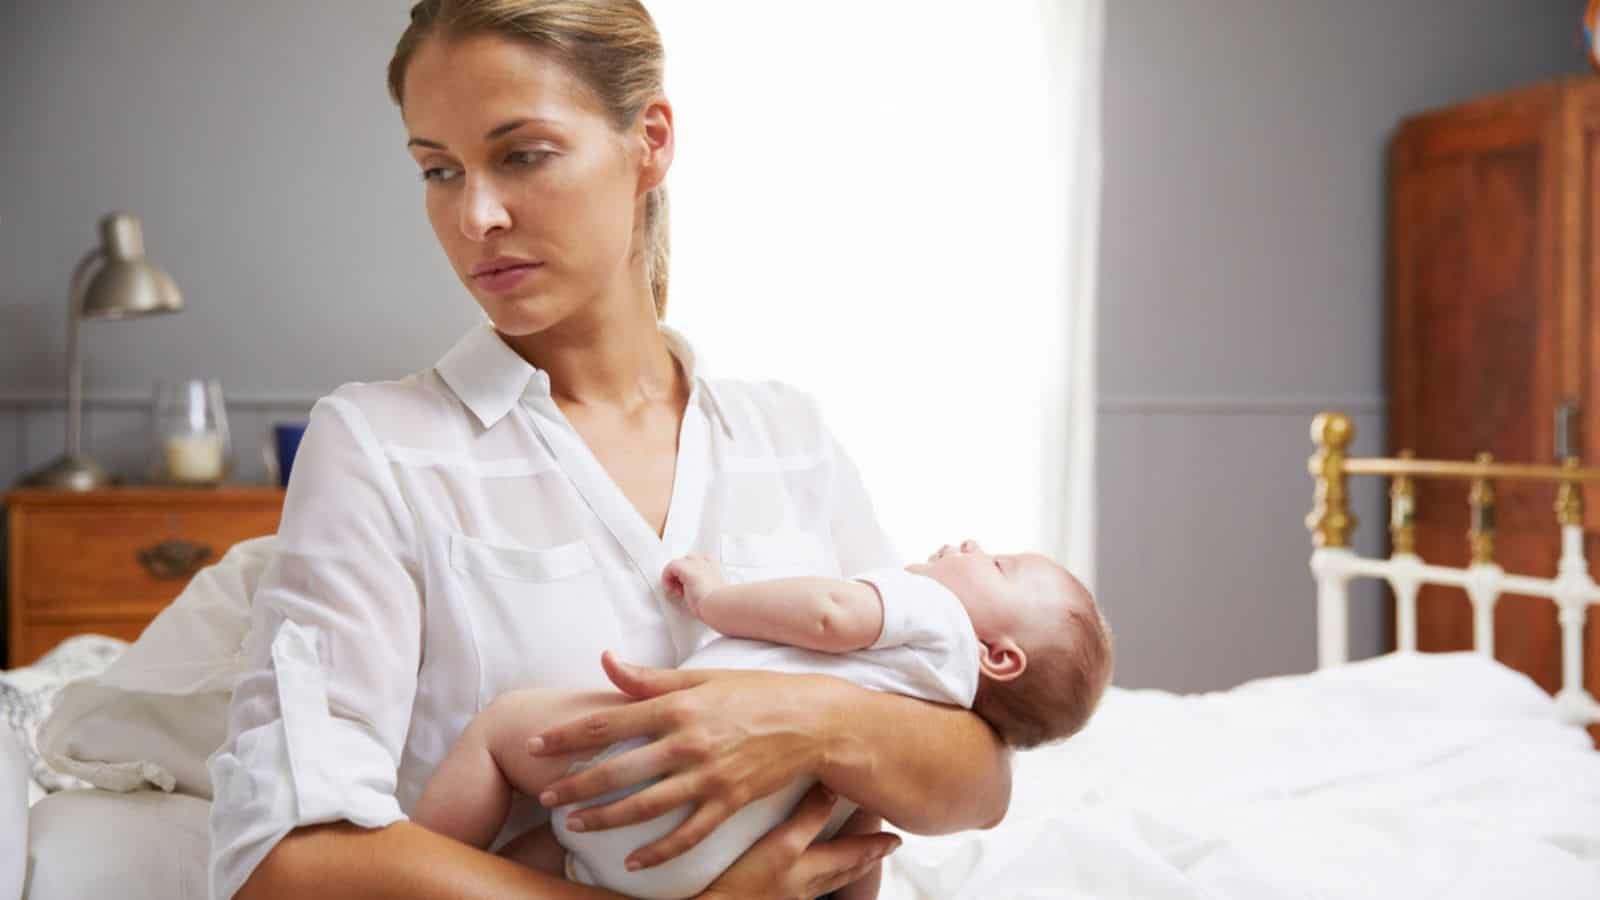 Sad Mother Holding Baby In Bedroom